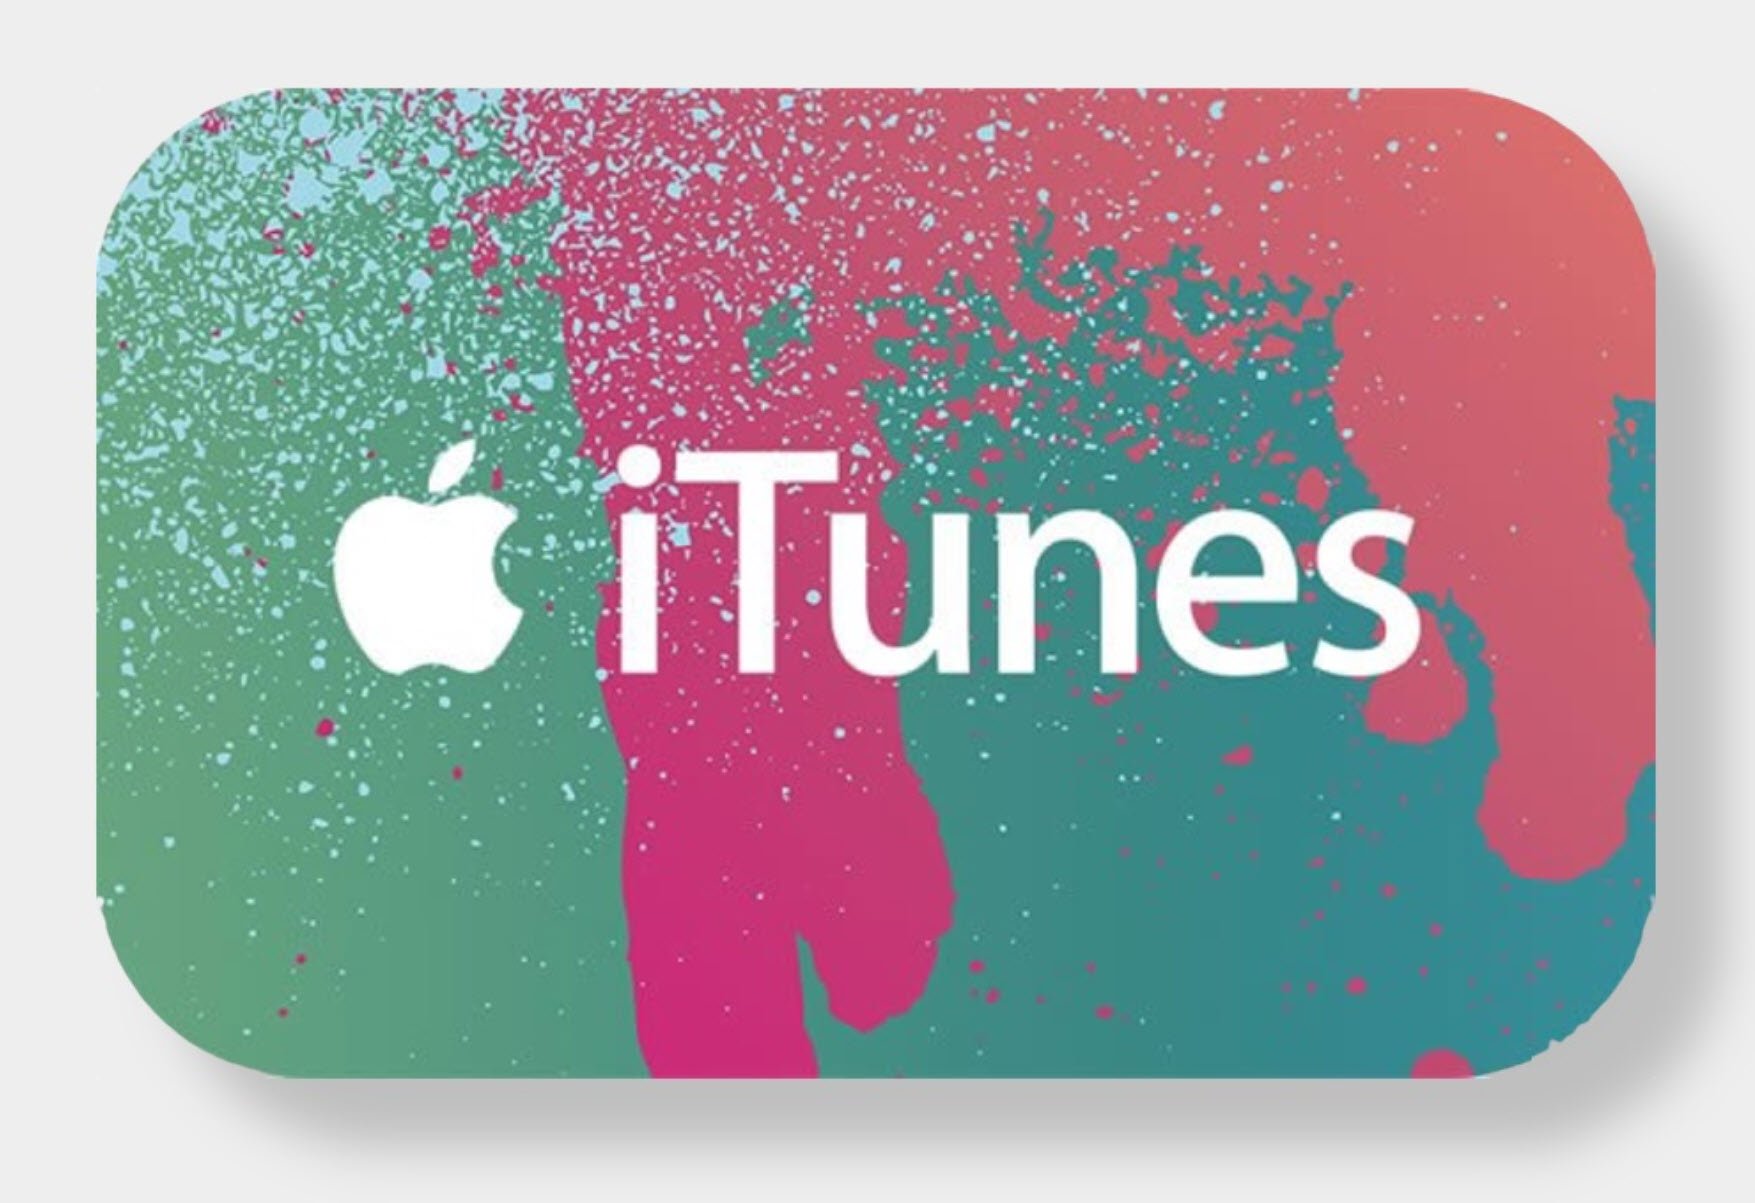 🏆Apple iTunes Gift Card 500 RUBLES🏅PRICE🔥✅